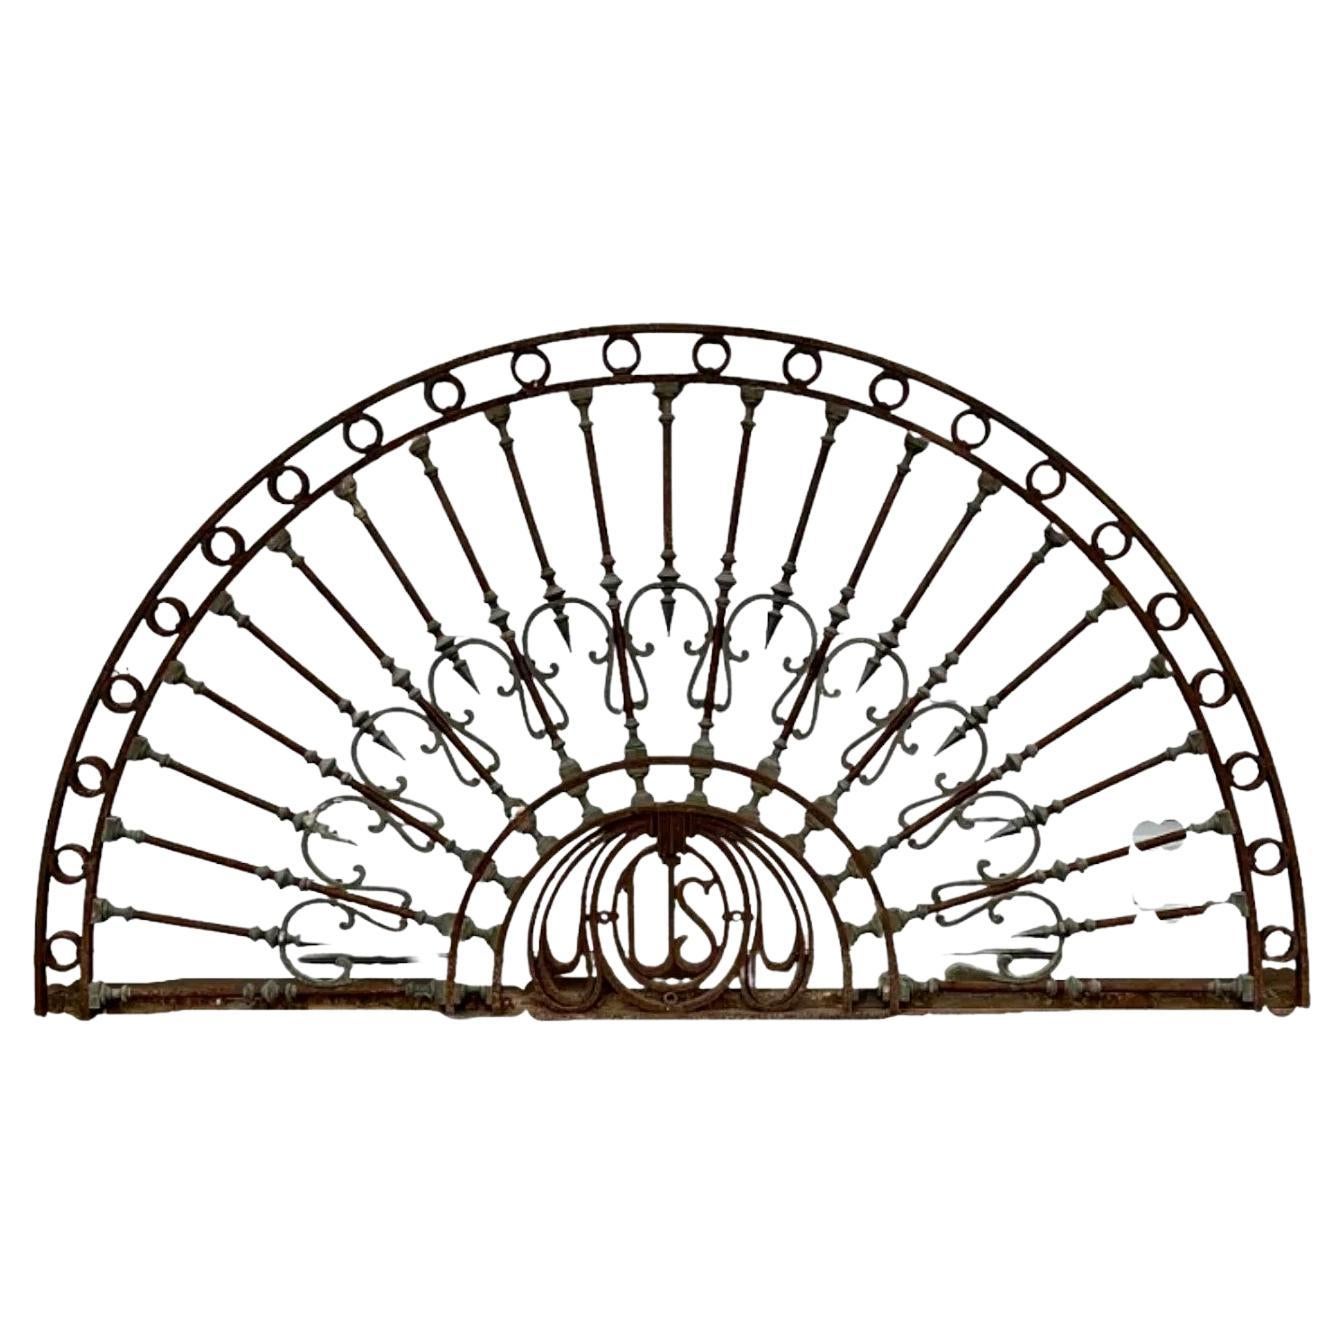 Antique US Embassy Architectural Arched Iron Fanlight Header For Sale